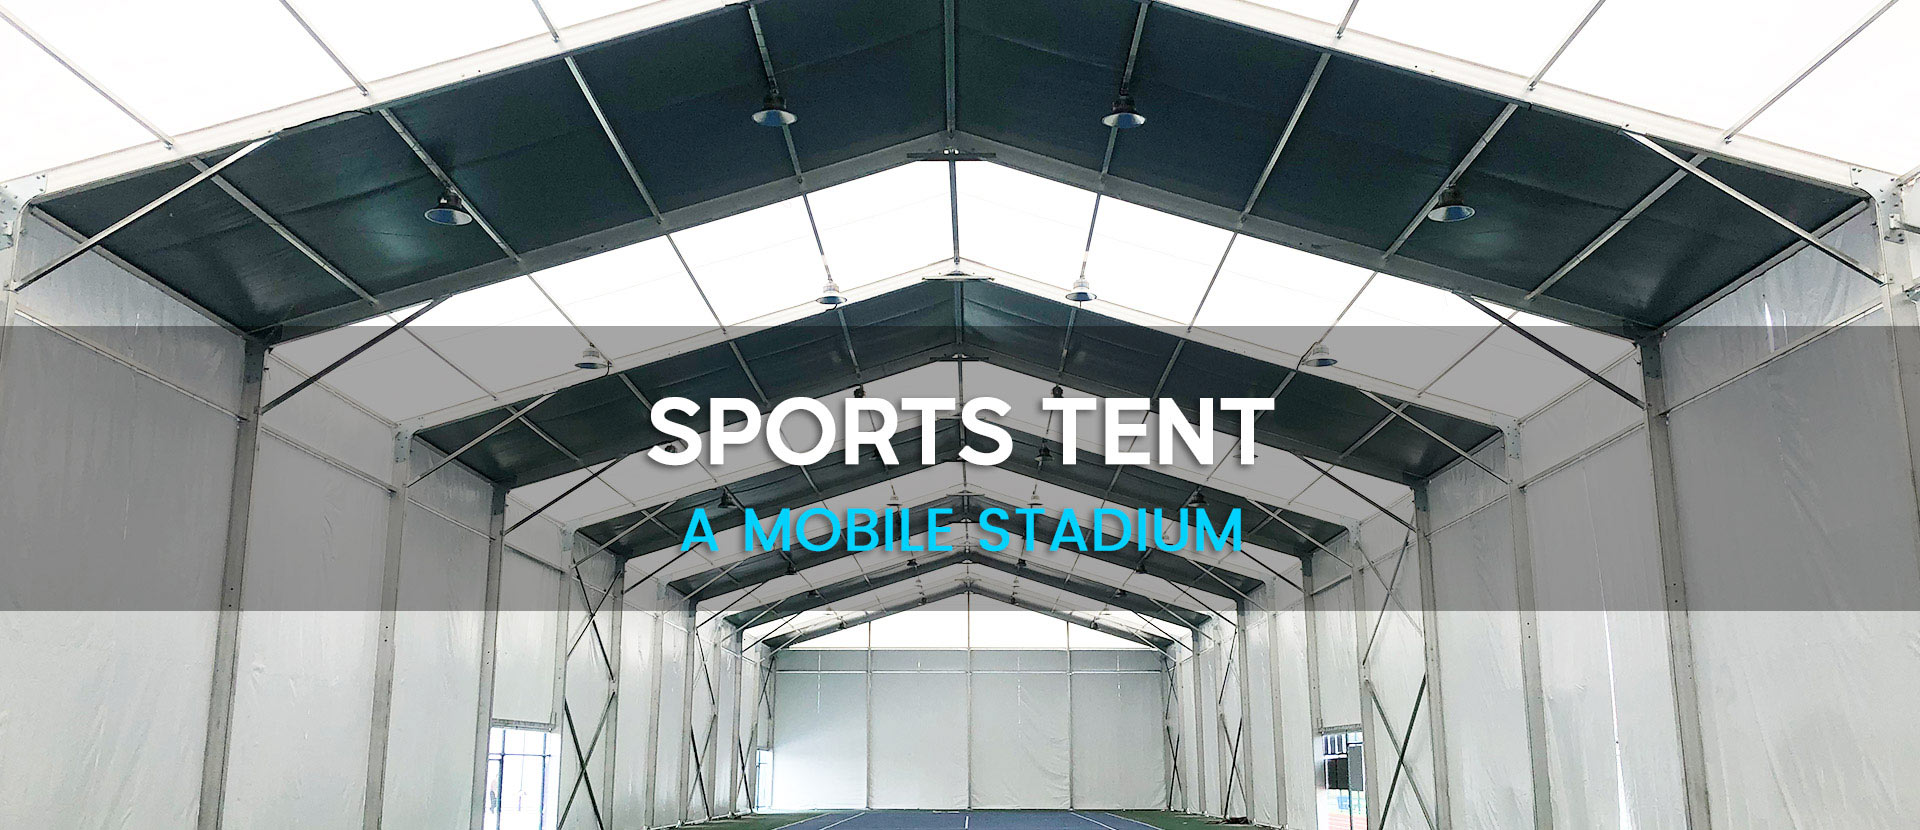 SPORTS TENT A MOBILE STADIUM